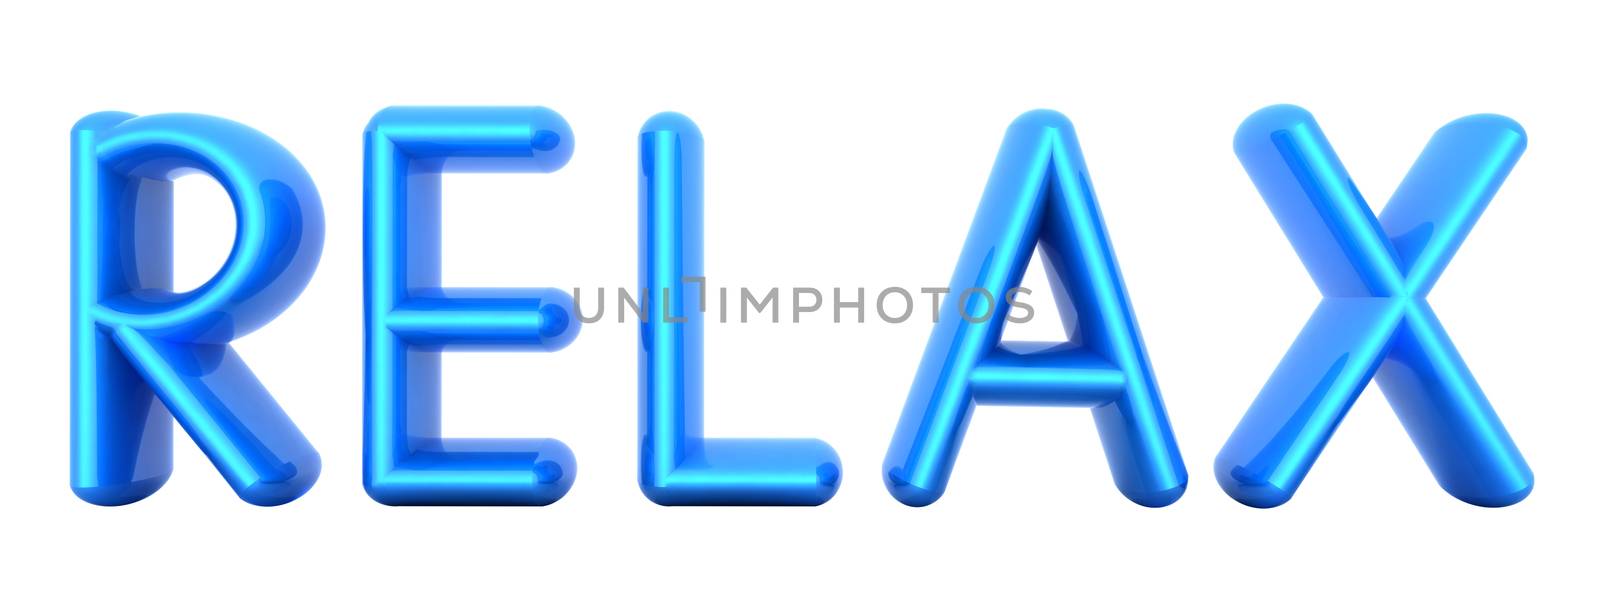 Blue word "Relax" isolated on white background. 3d illustration